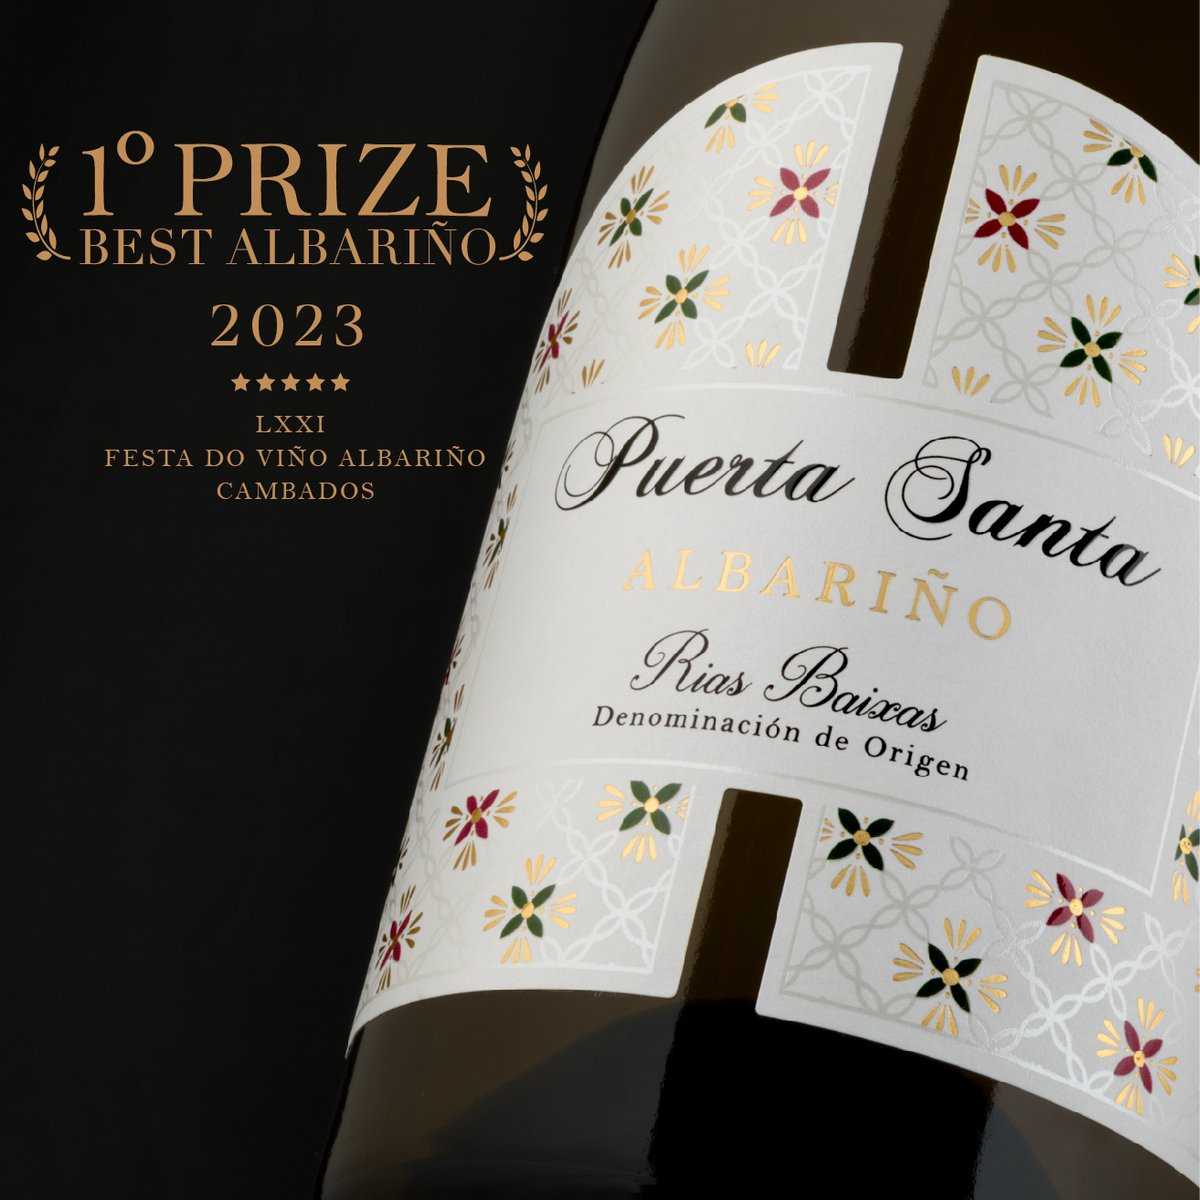 Following on from #InternationalAlbariñoDay, more good news for Albariño lovers! We are immensely proud of the team at Morgadío. Their Puerta Santa Albariño was just selected as the Best Albariño at the 71st edition of the Albariño Festival in Cambados, the heart of Rías Baixas.